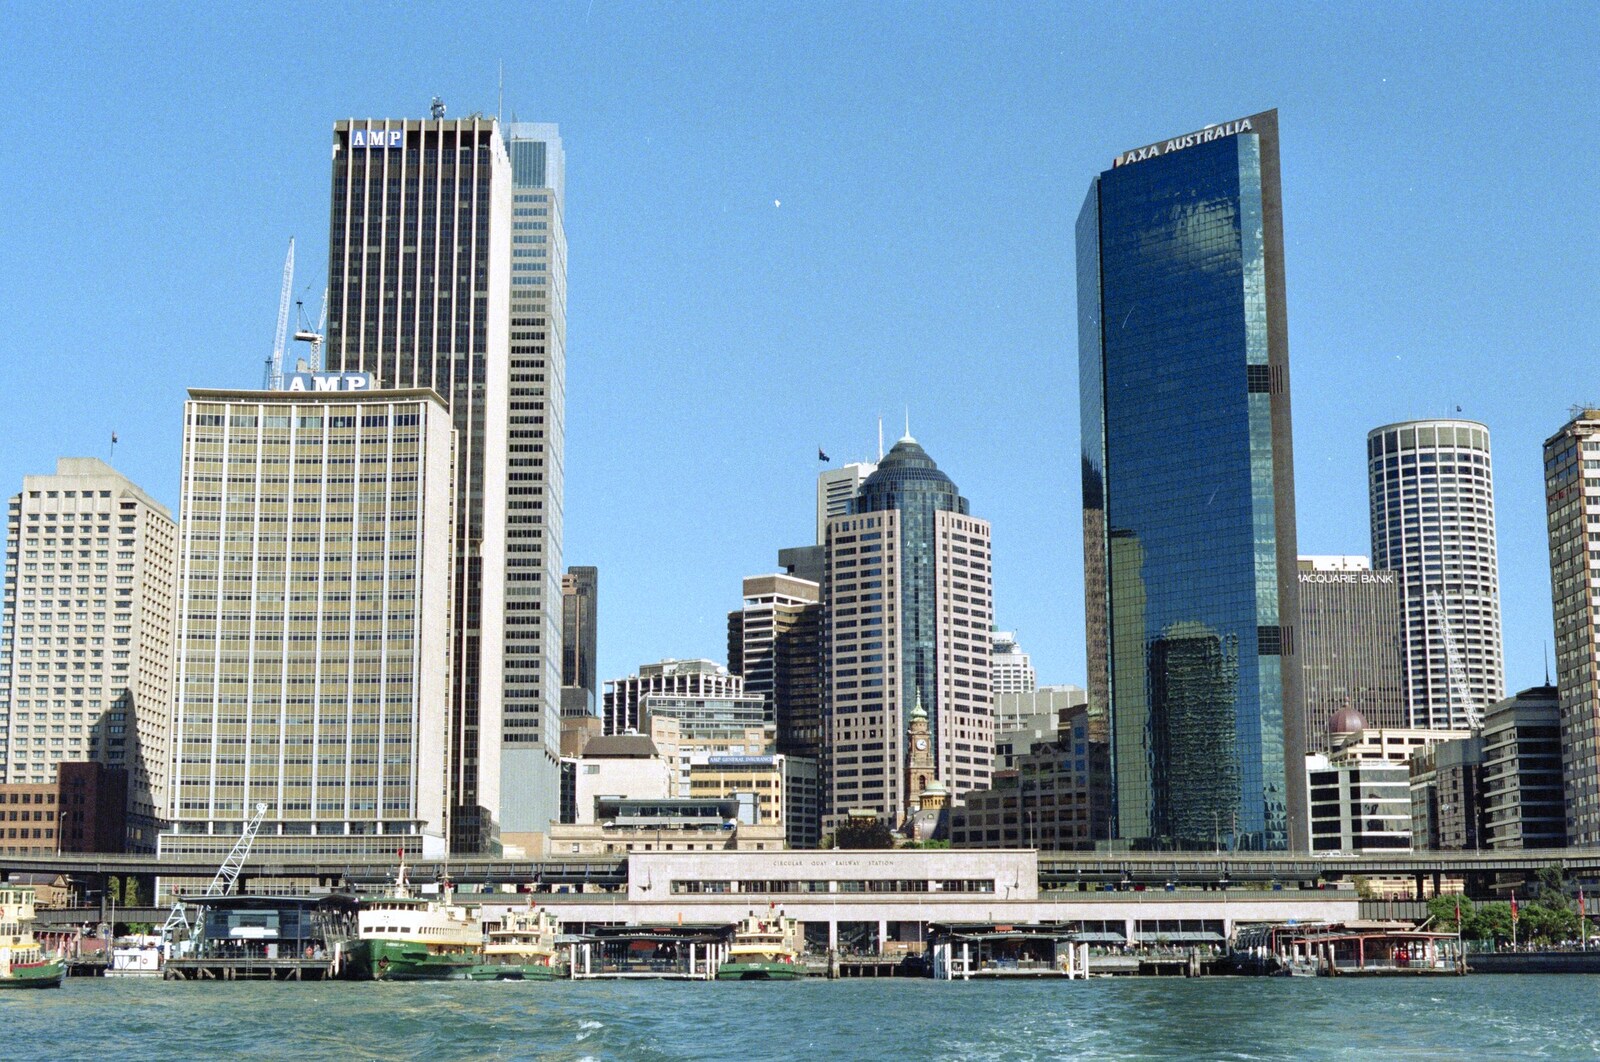 Circular Quay from A Trip to the Zoo, Sydney, Australia - 7th April 2000